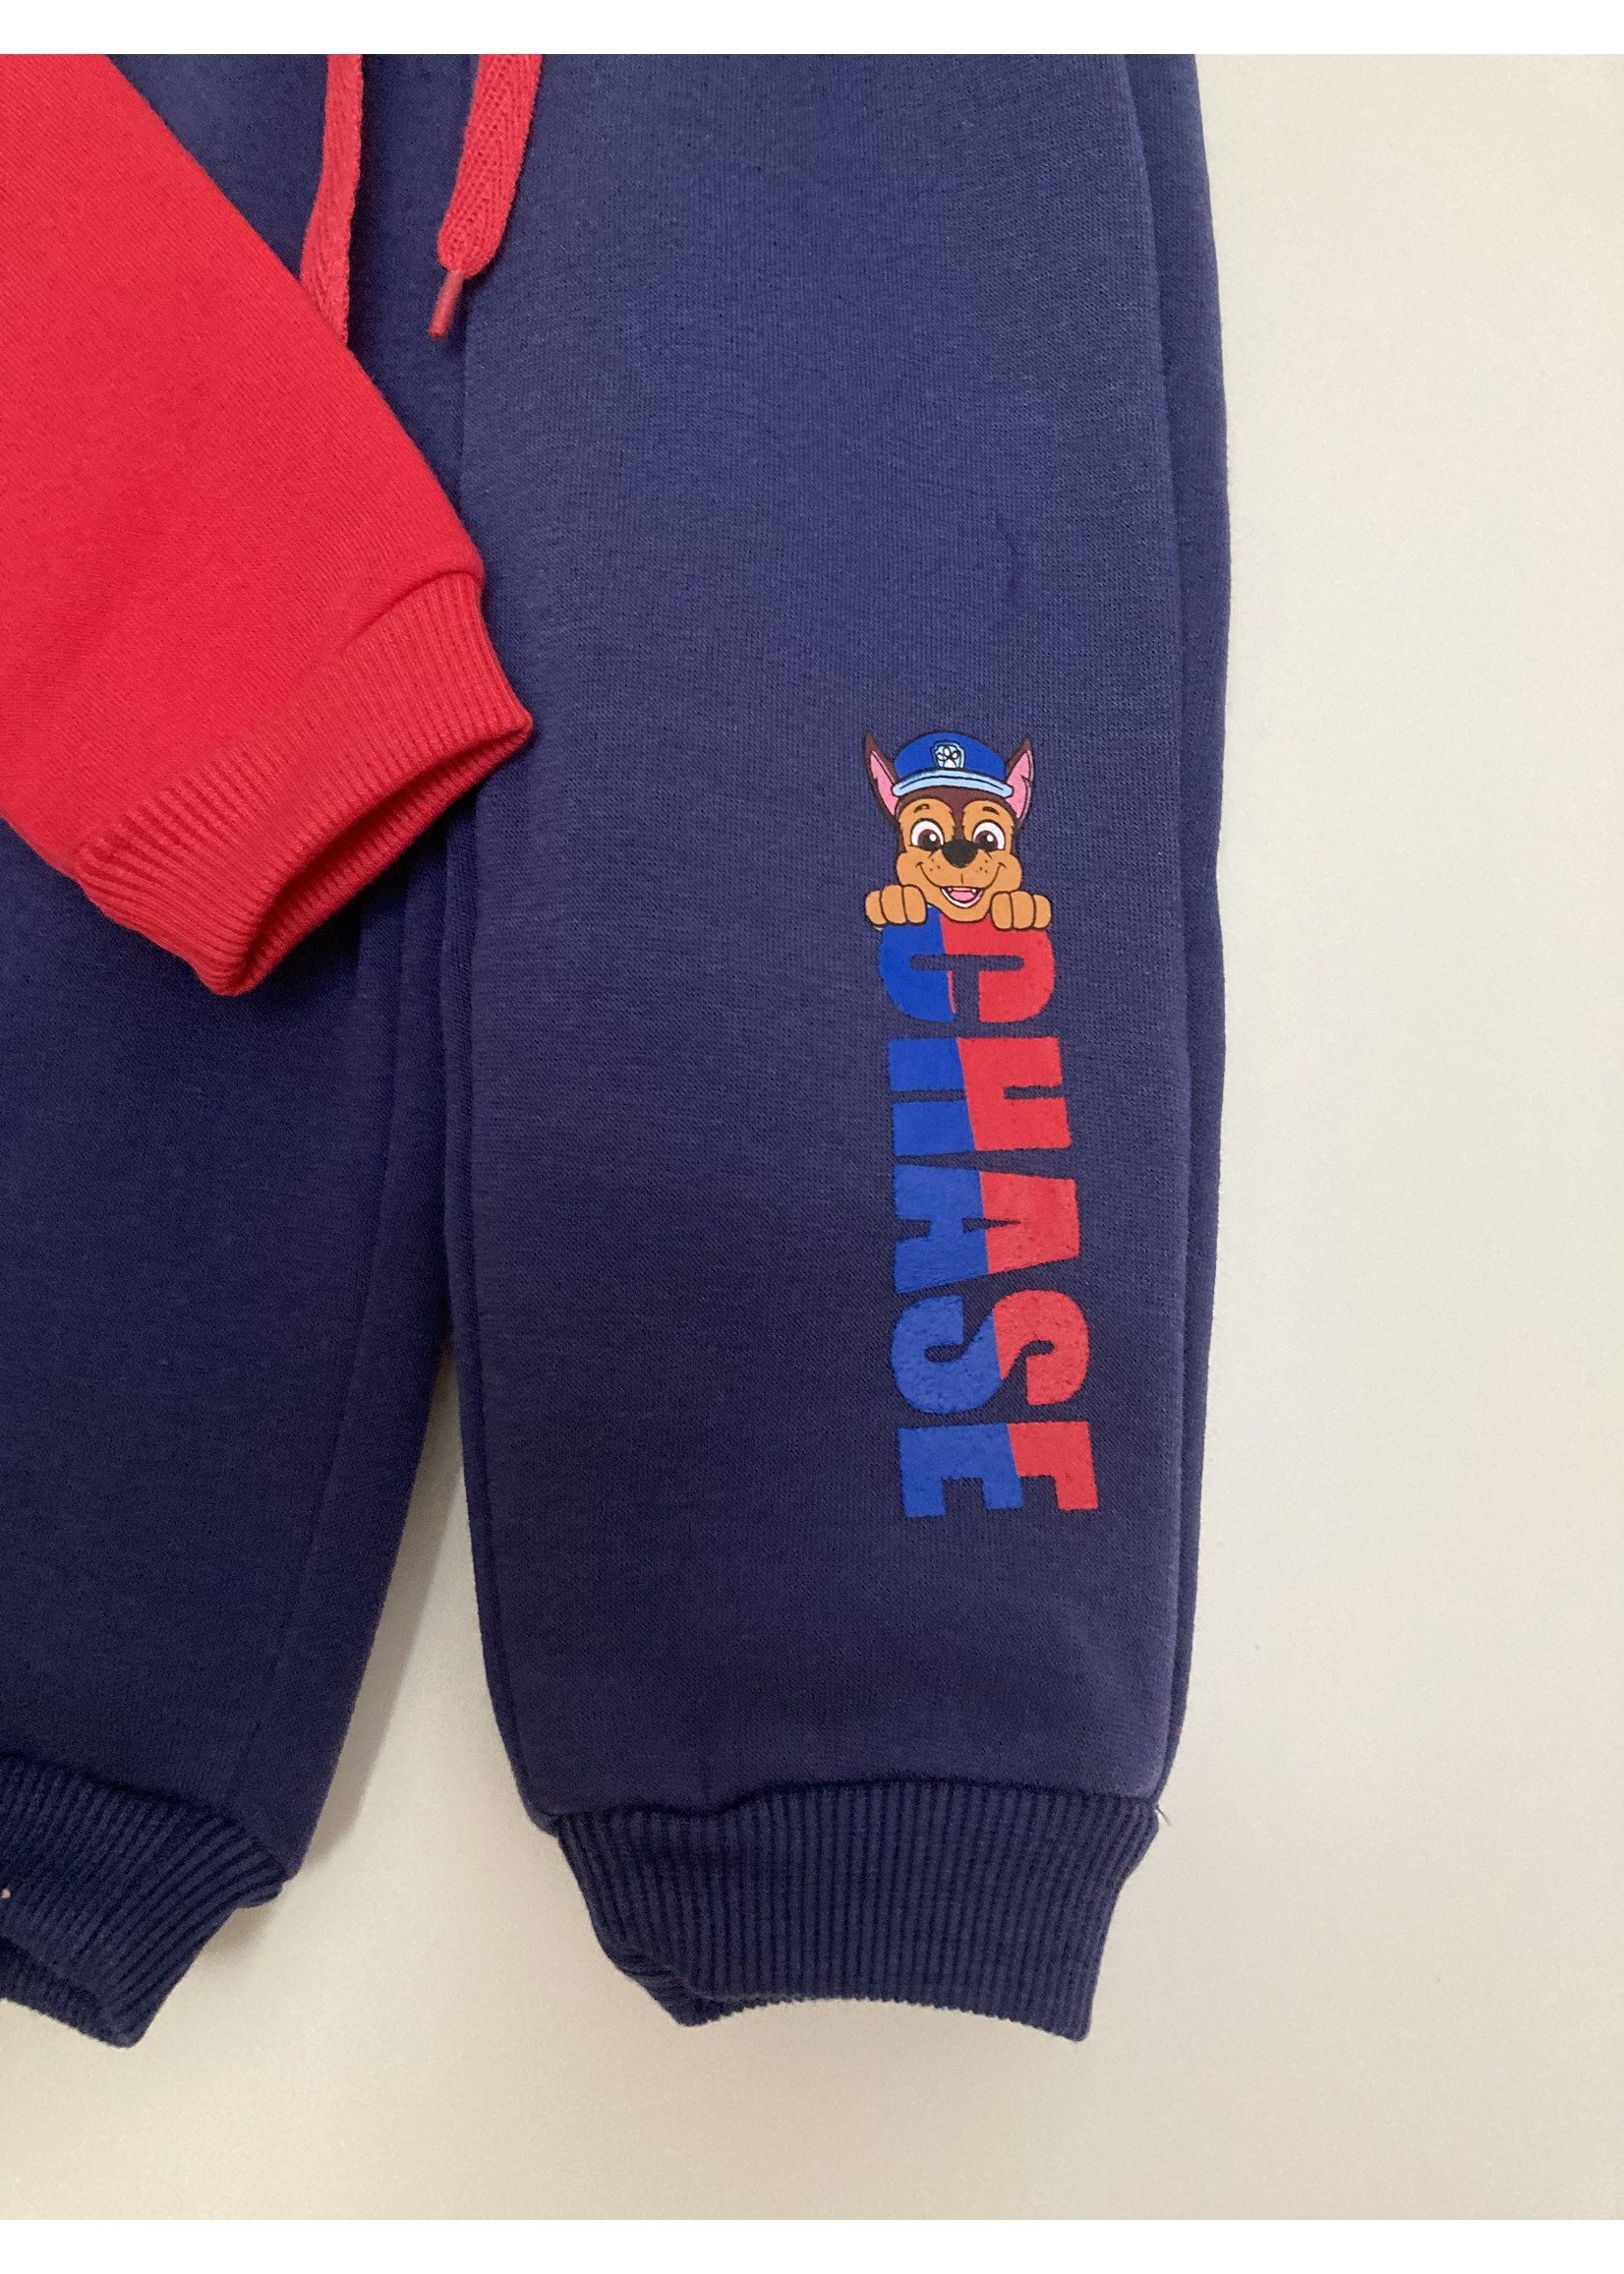 Nickelodeon Paw Patrol jogging suit from Nickelodeon red-blue